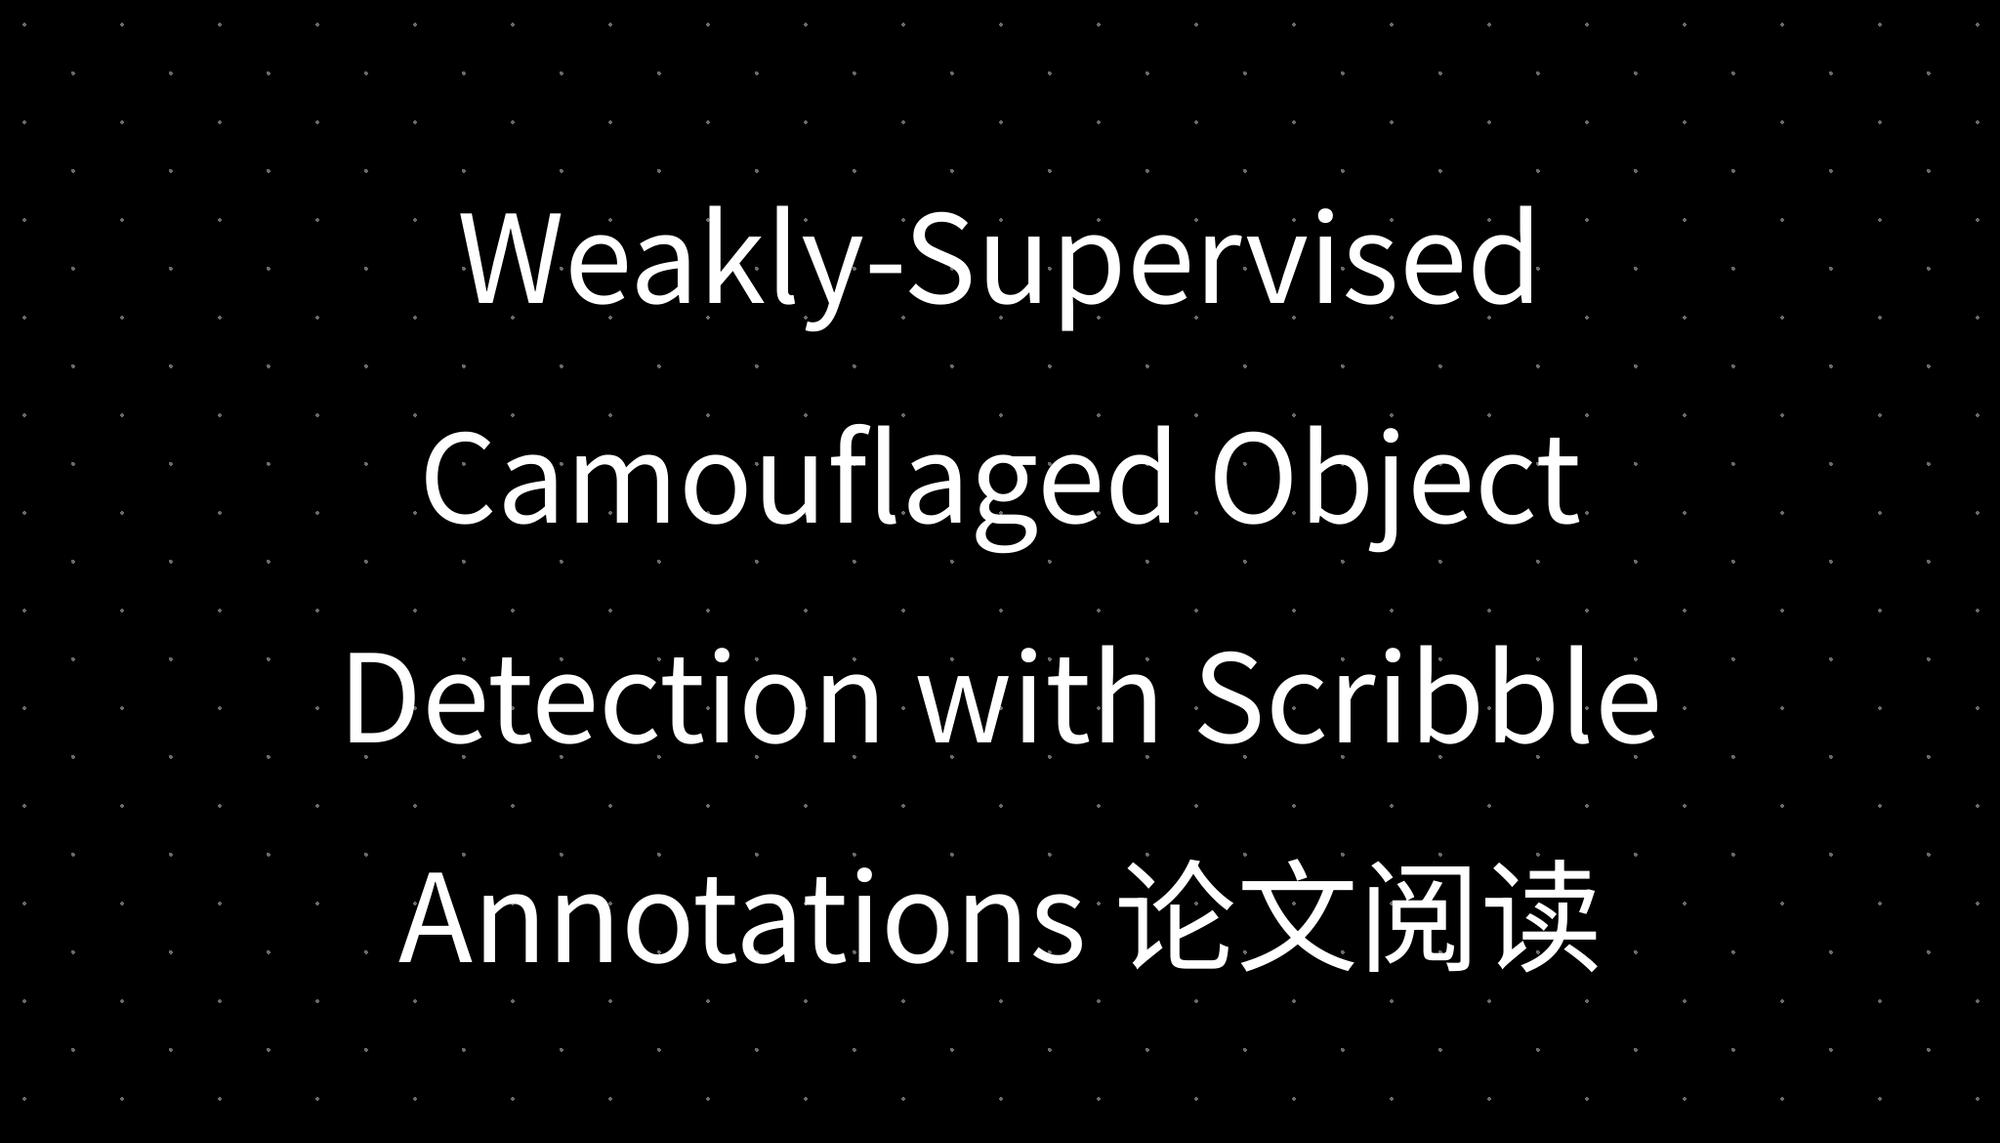 Weakly-Supervised Camouflaged Object Detection with Scribble Annotations 论文阅读